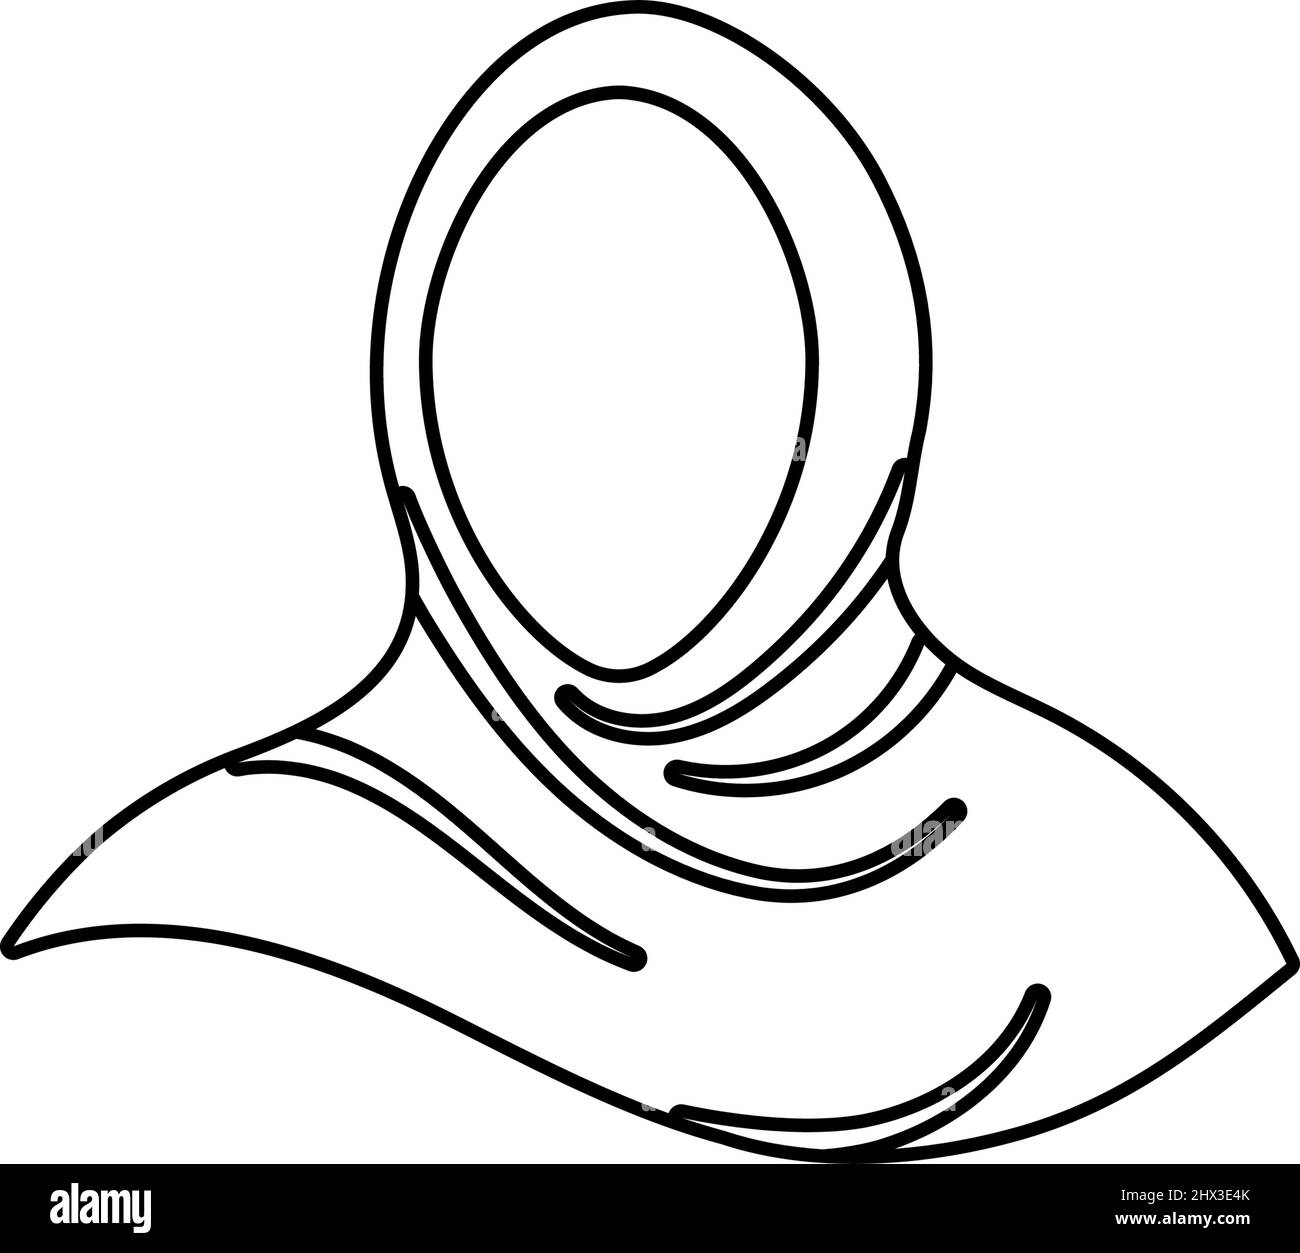 hijab icon design template vector isolated illustration Stock Vector